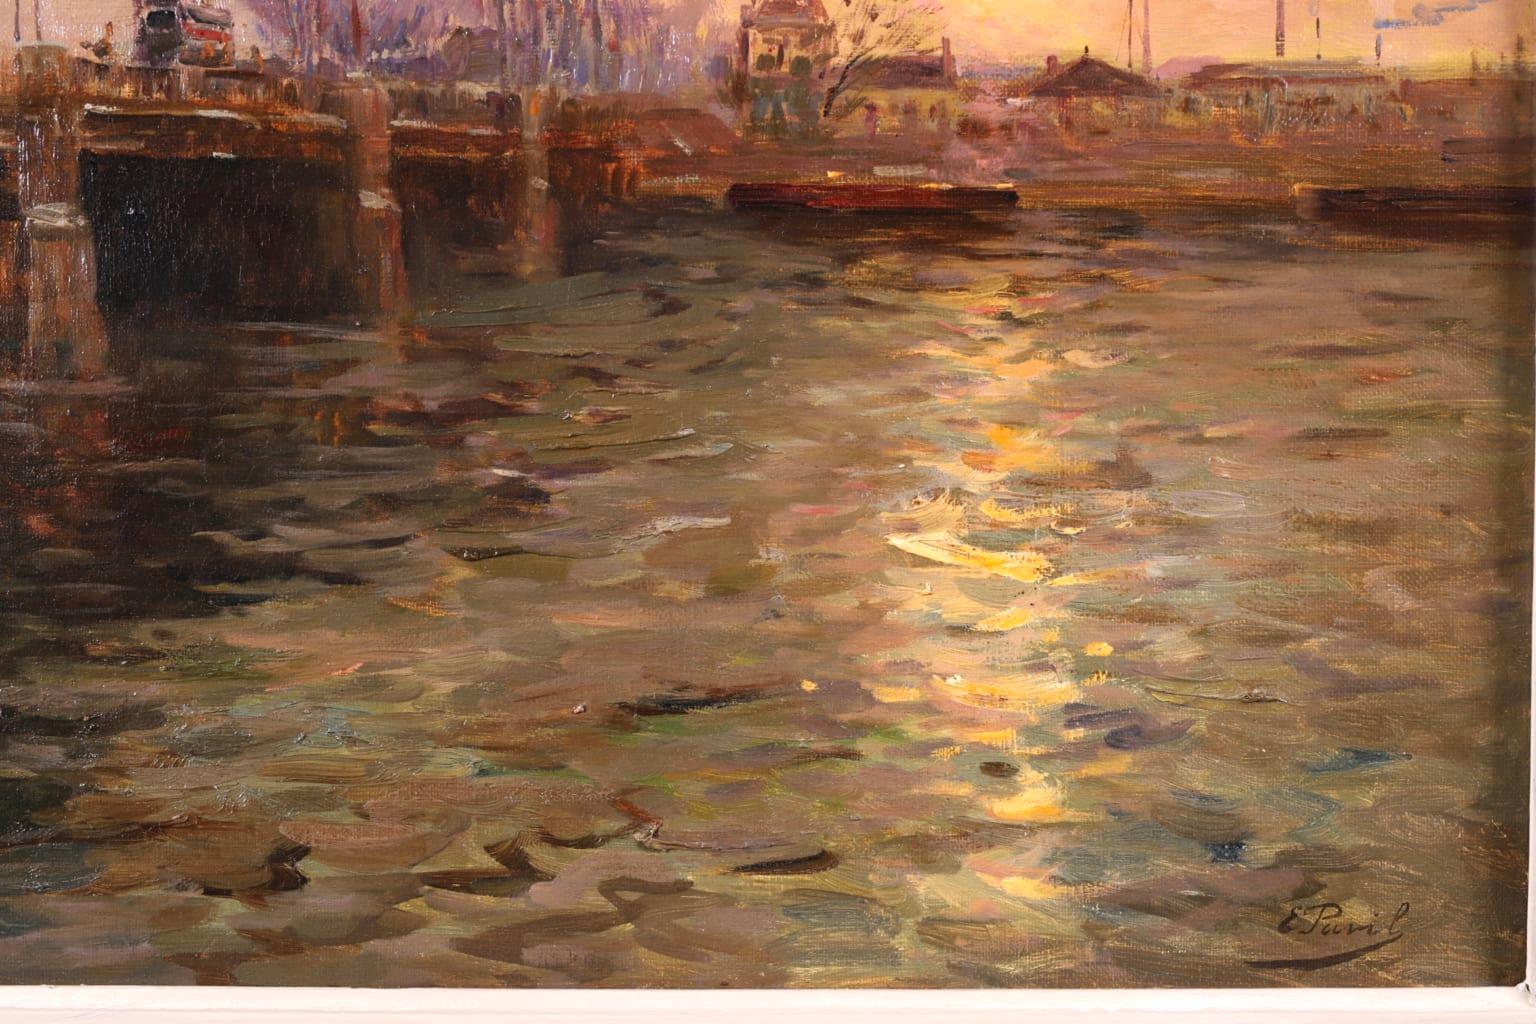 Sunset on the River Seine - Impressionist Oil, Riverscape by Elie Anatole Pavil 2